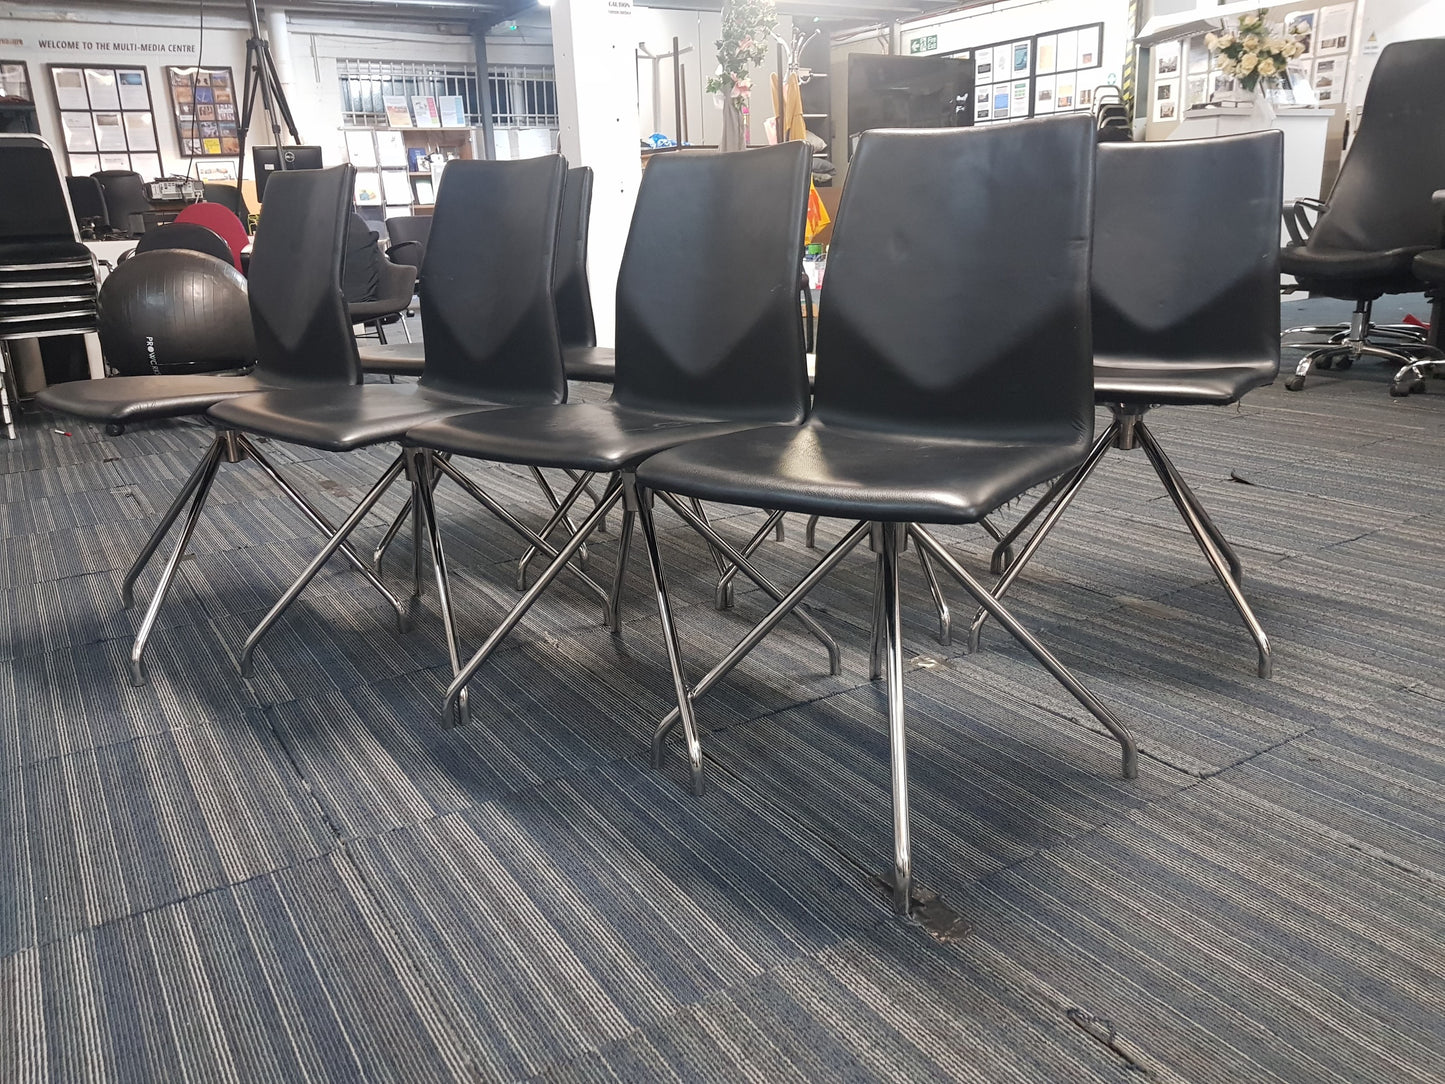 Eight black leather chairs on carpet